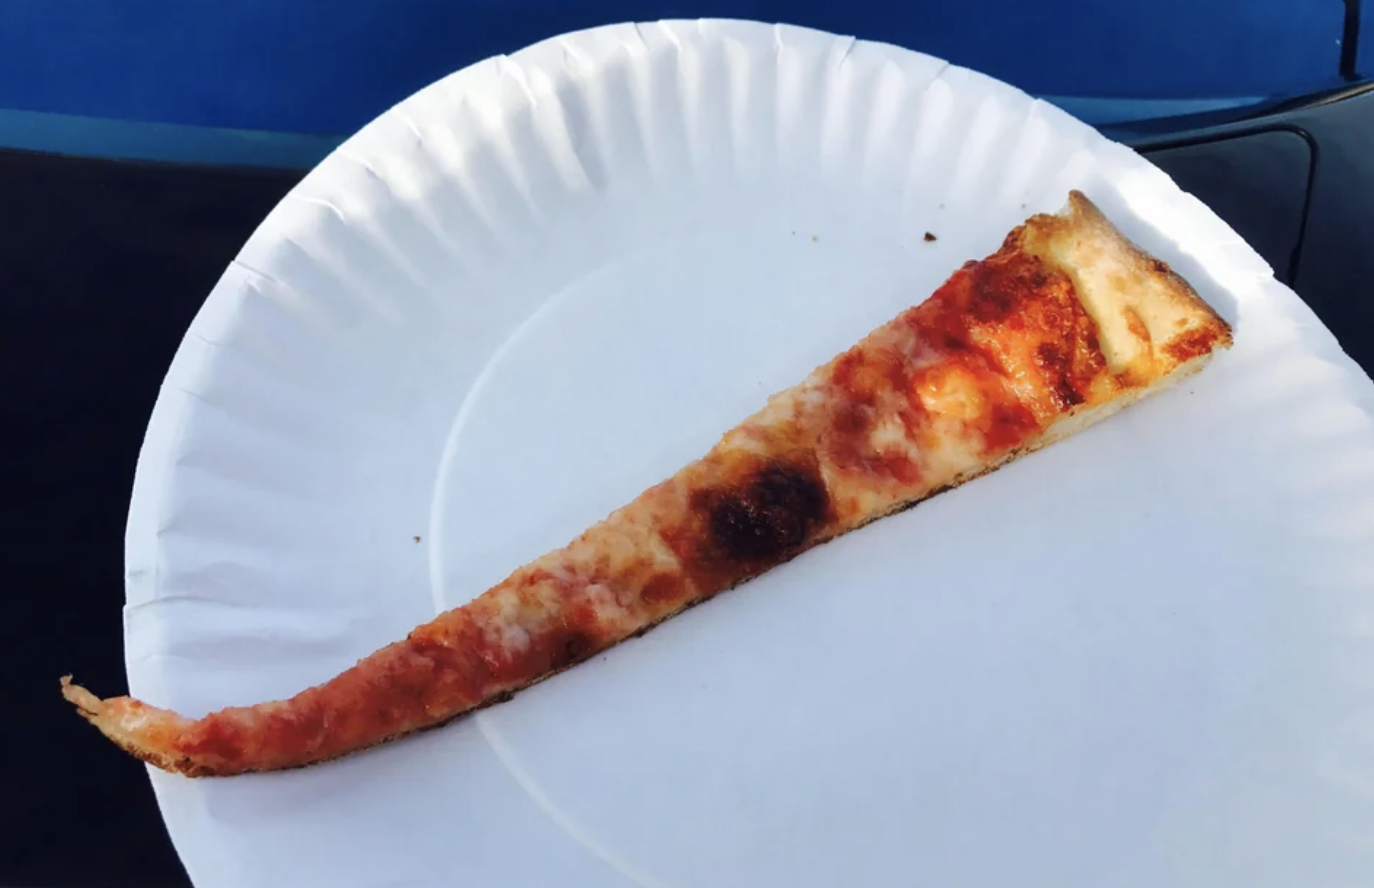 A thin slice of pizza